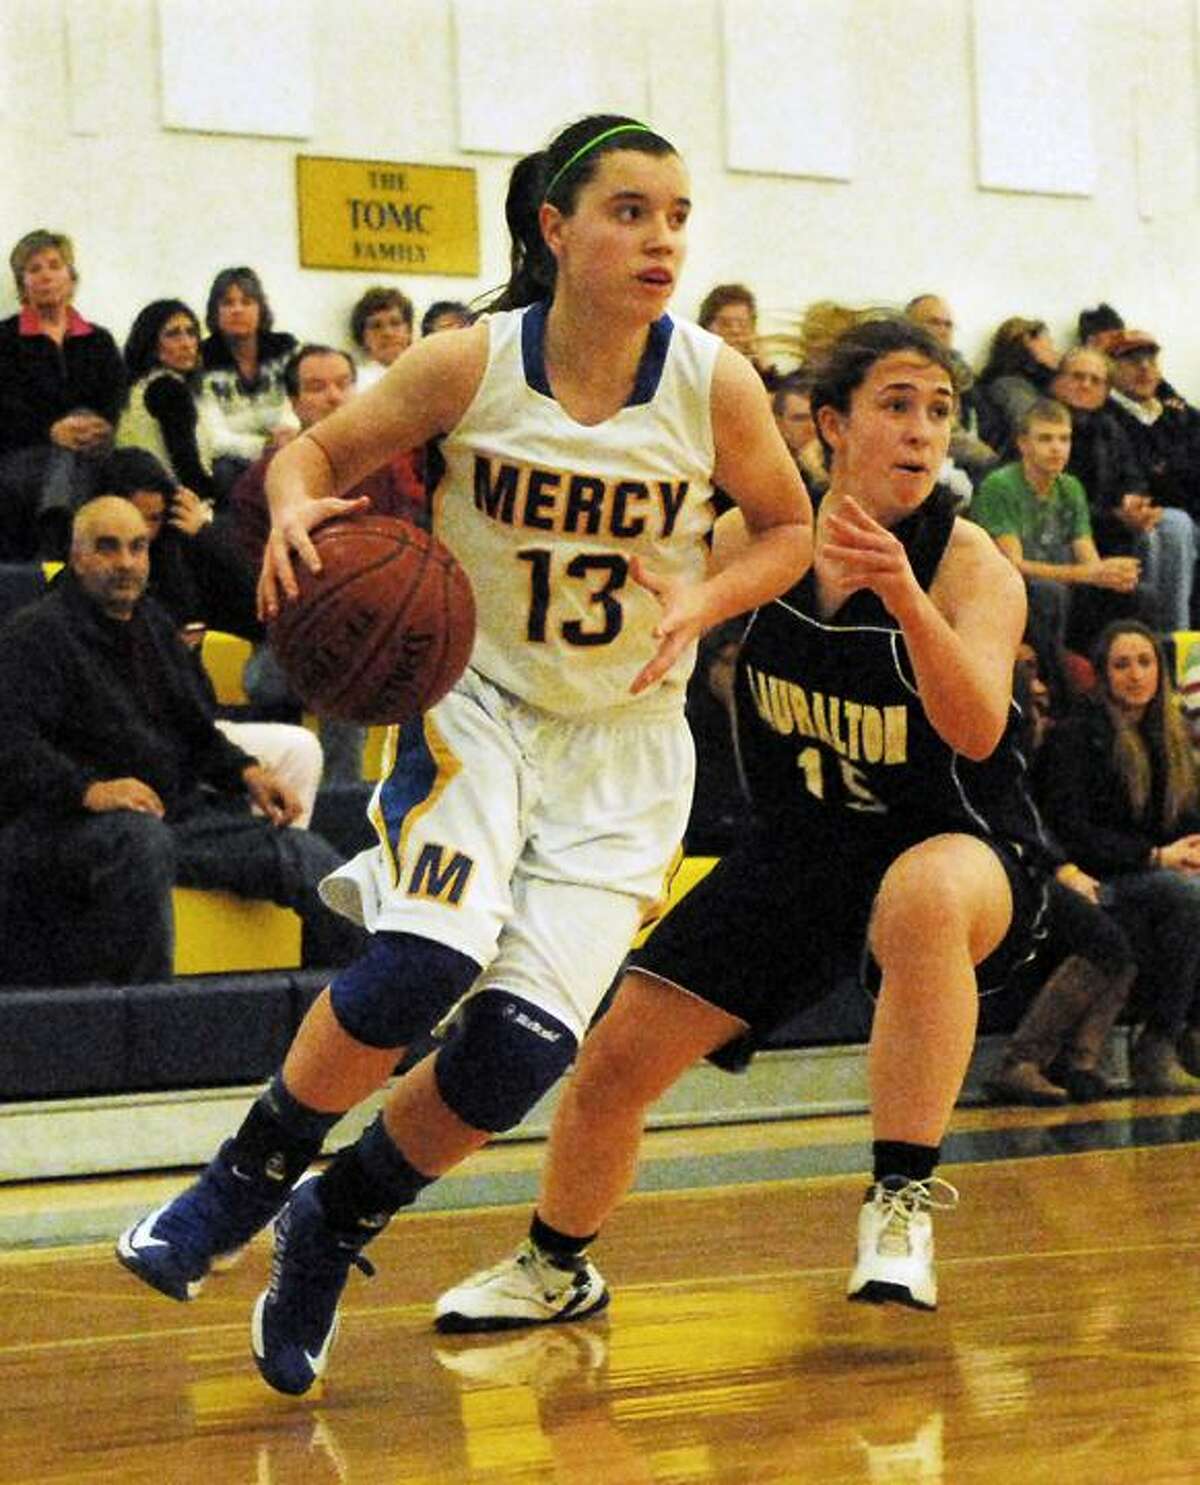 Catherine Avalone/The Middletown Press Mercy senior captain Maria Weselyj drives as Lauralton Hall junior Maureen Connolly defends during the Mercy Classic championship game Friday night. The Mercy Tiges defeated the Lauralton Hall Crusaders 66-47.